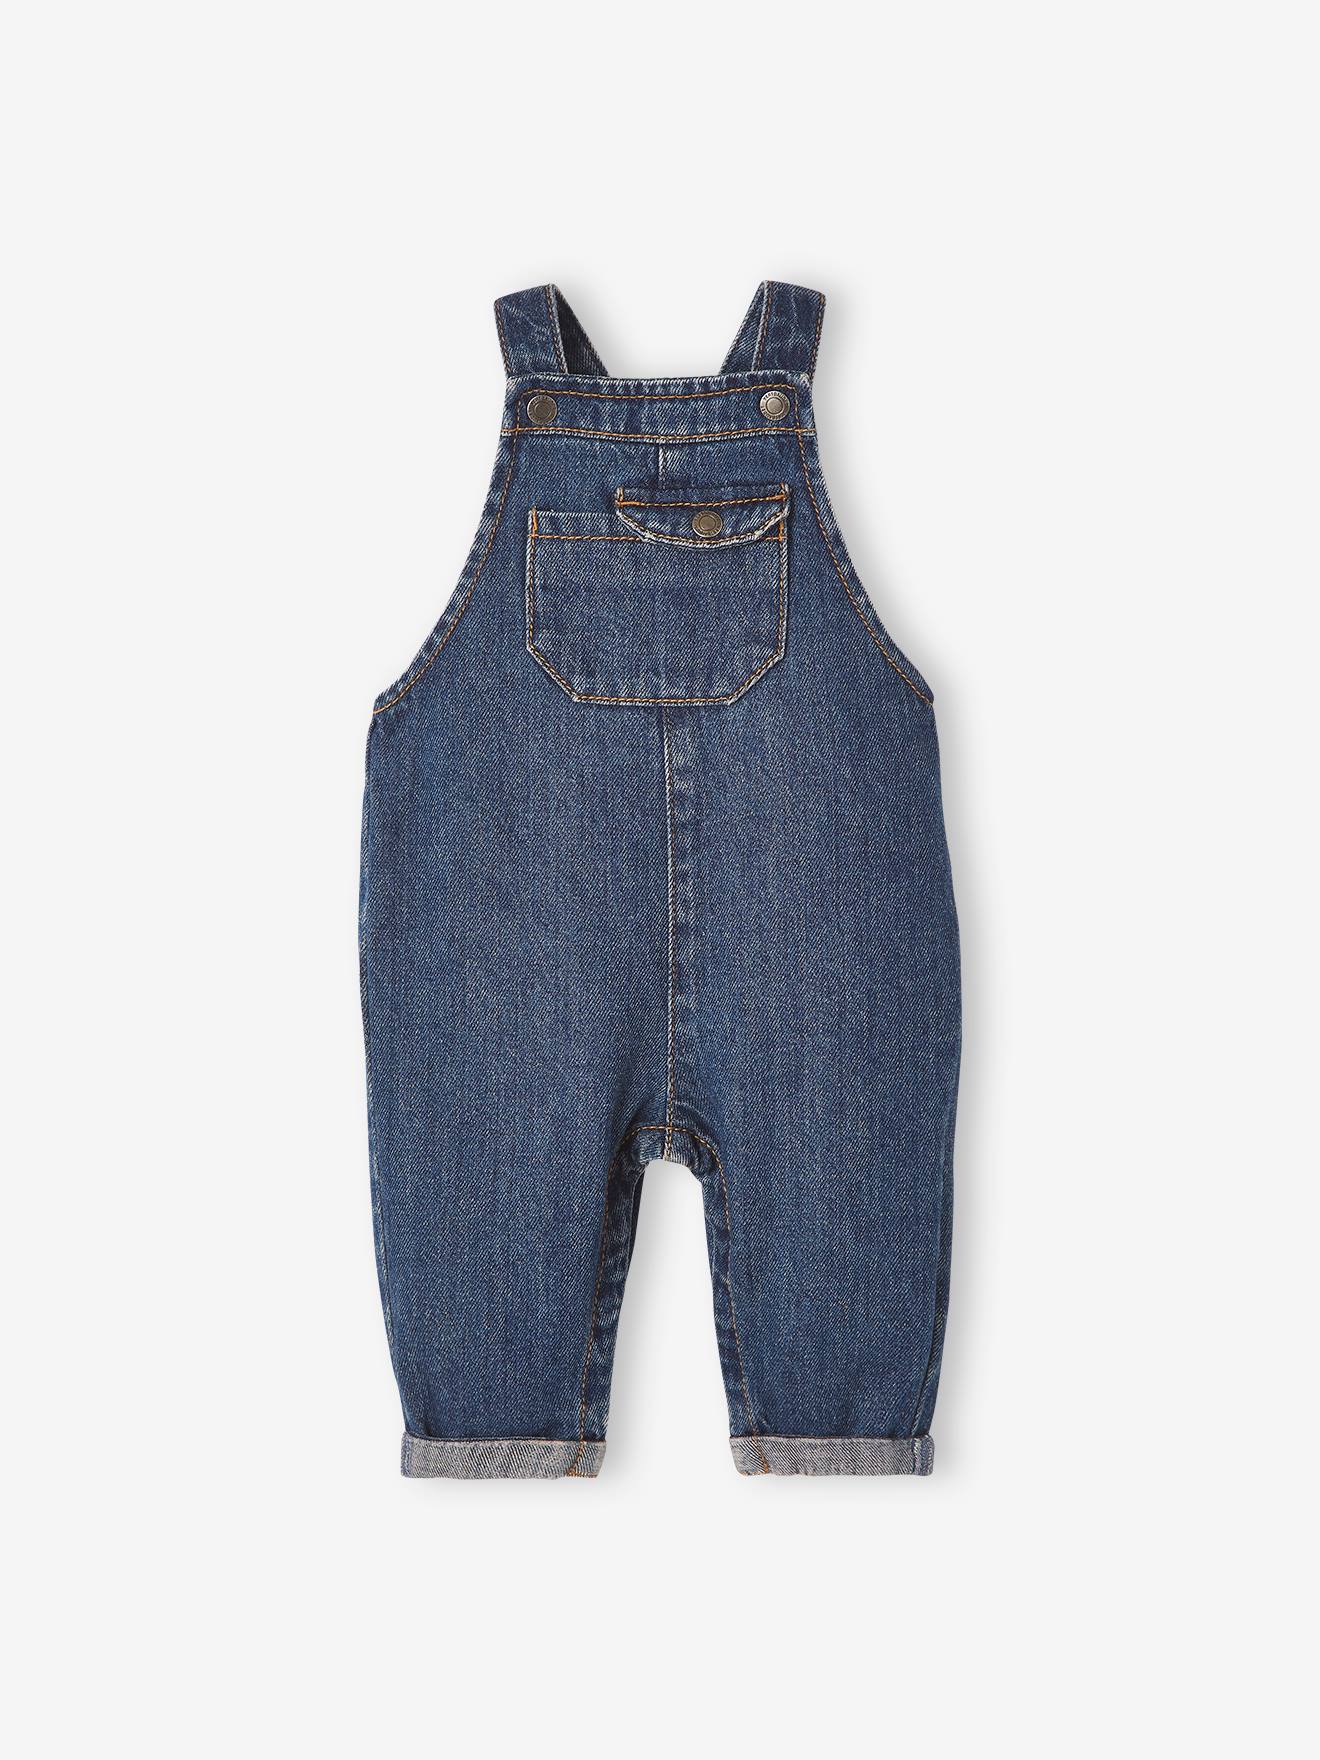 Navy Blue/White S discount 91% Bershka jumpsuit WOMEN FASHION Baby Jumpsuits & Dungarees Print 